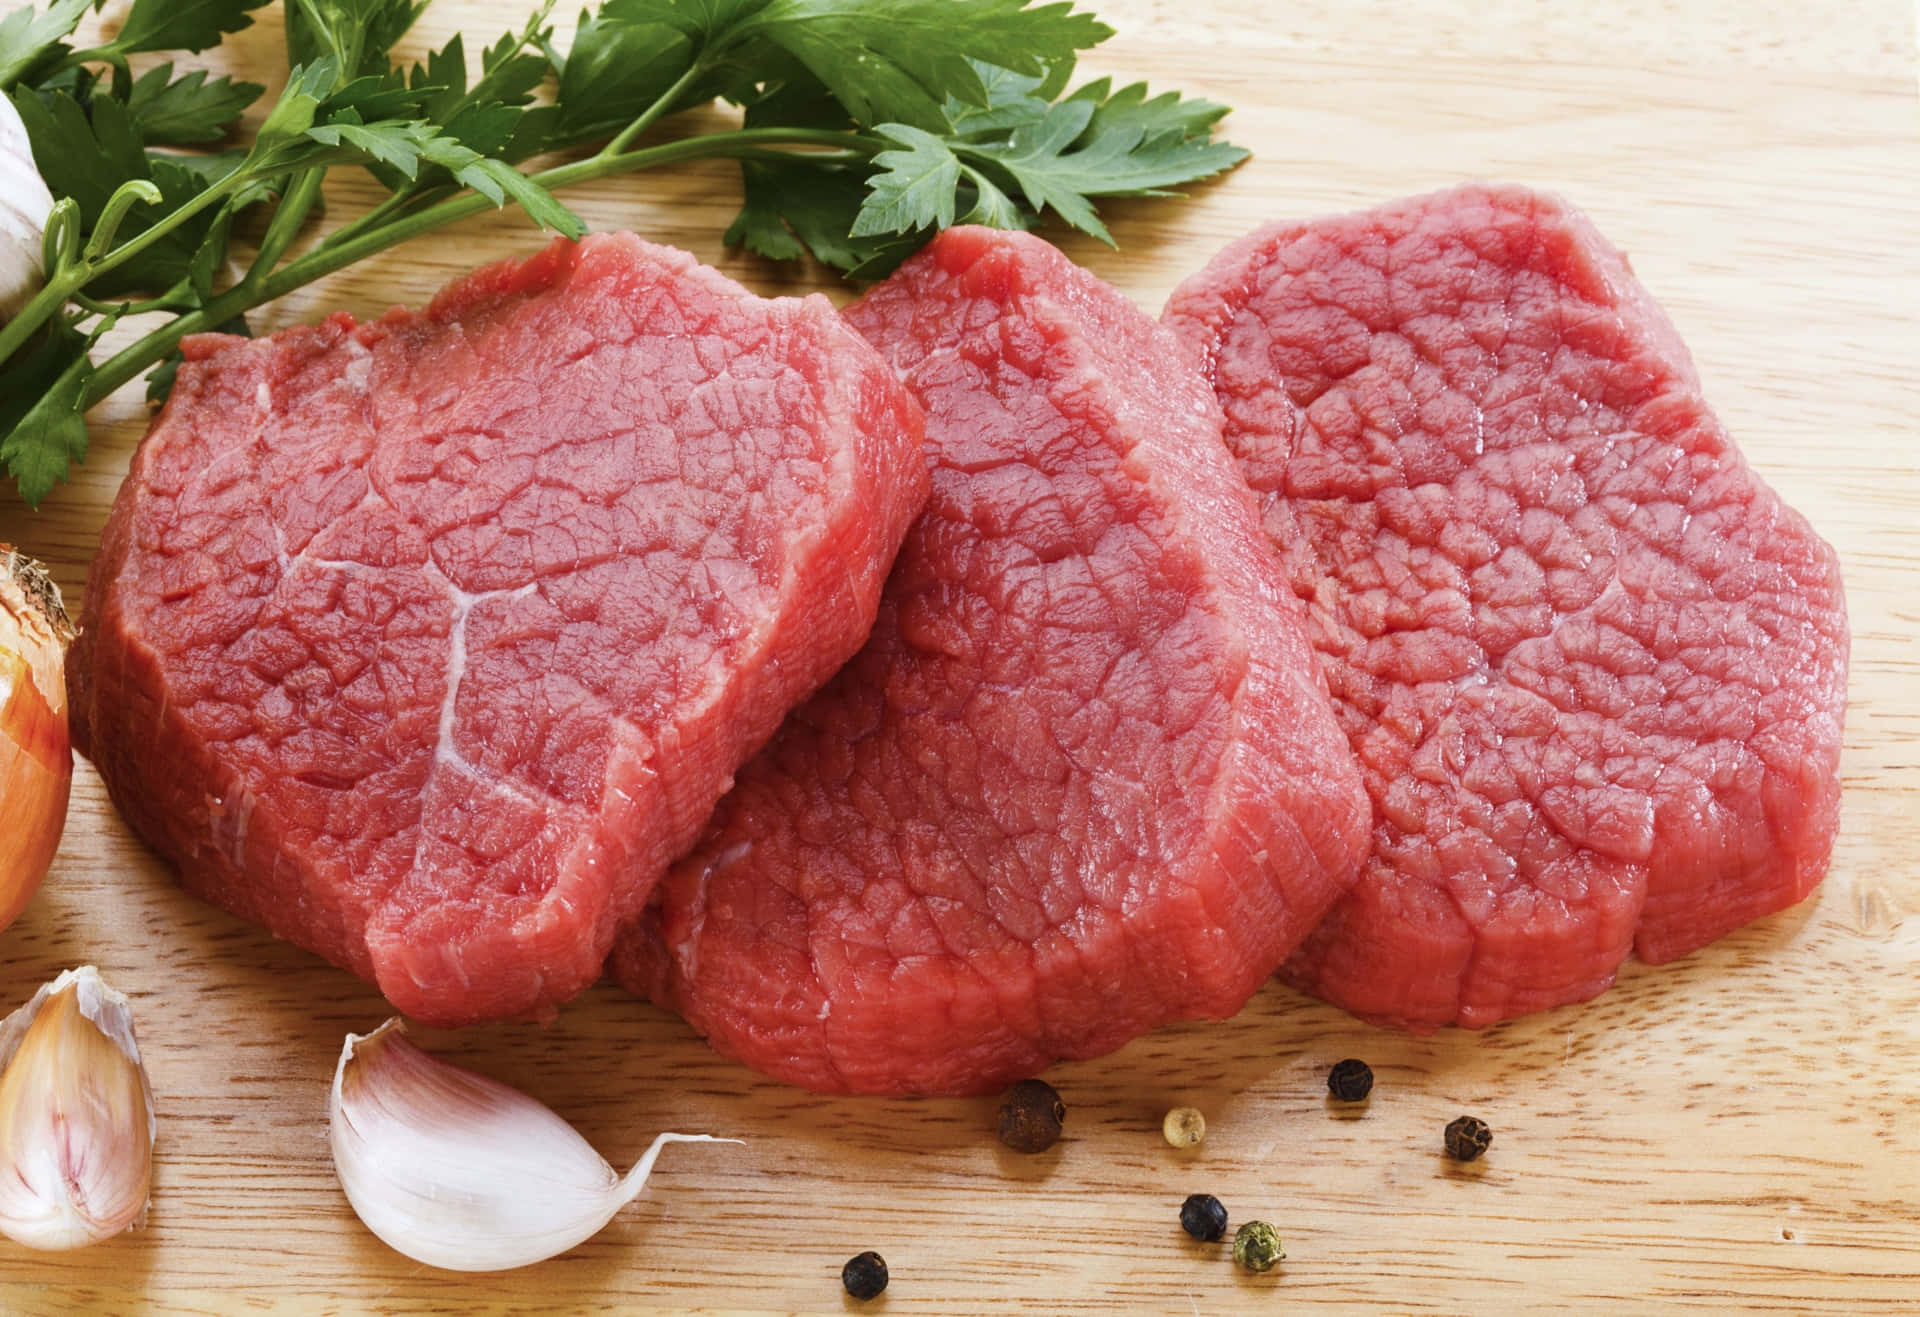 Choose high-quality top-notch meat for your next meal!